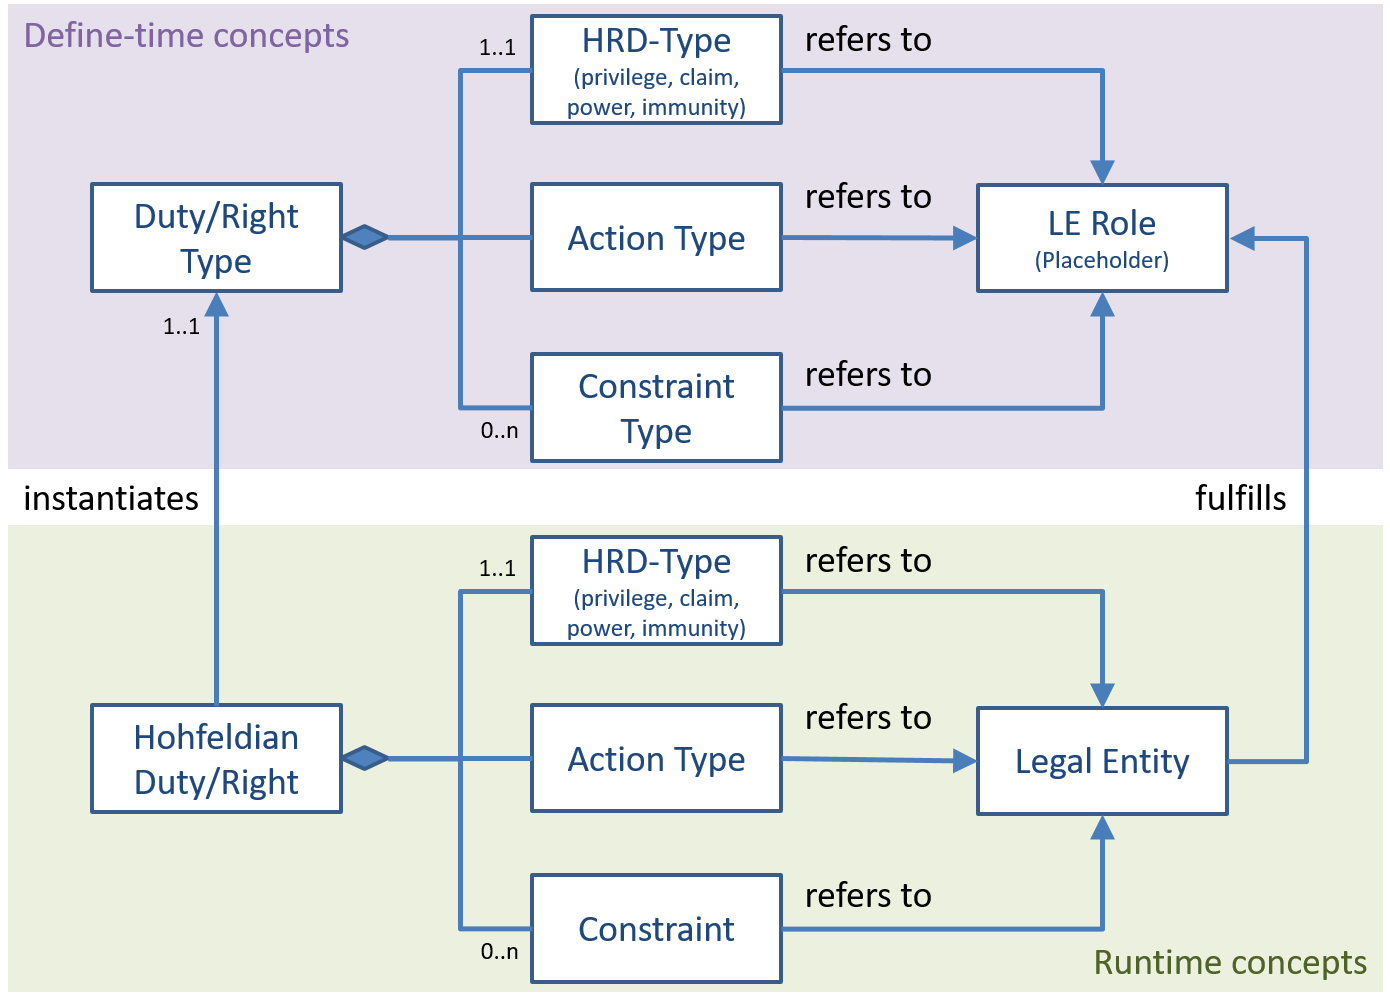 Conceptual model of the 'Duties-and-rights' pattern